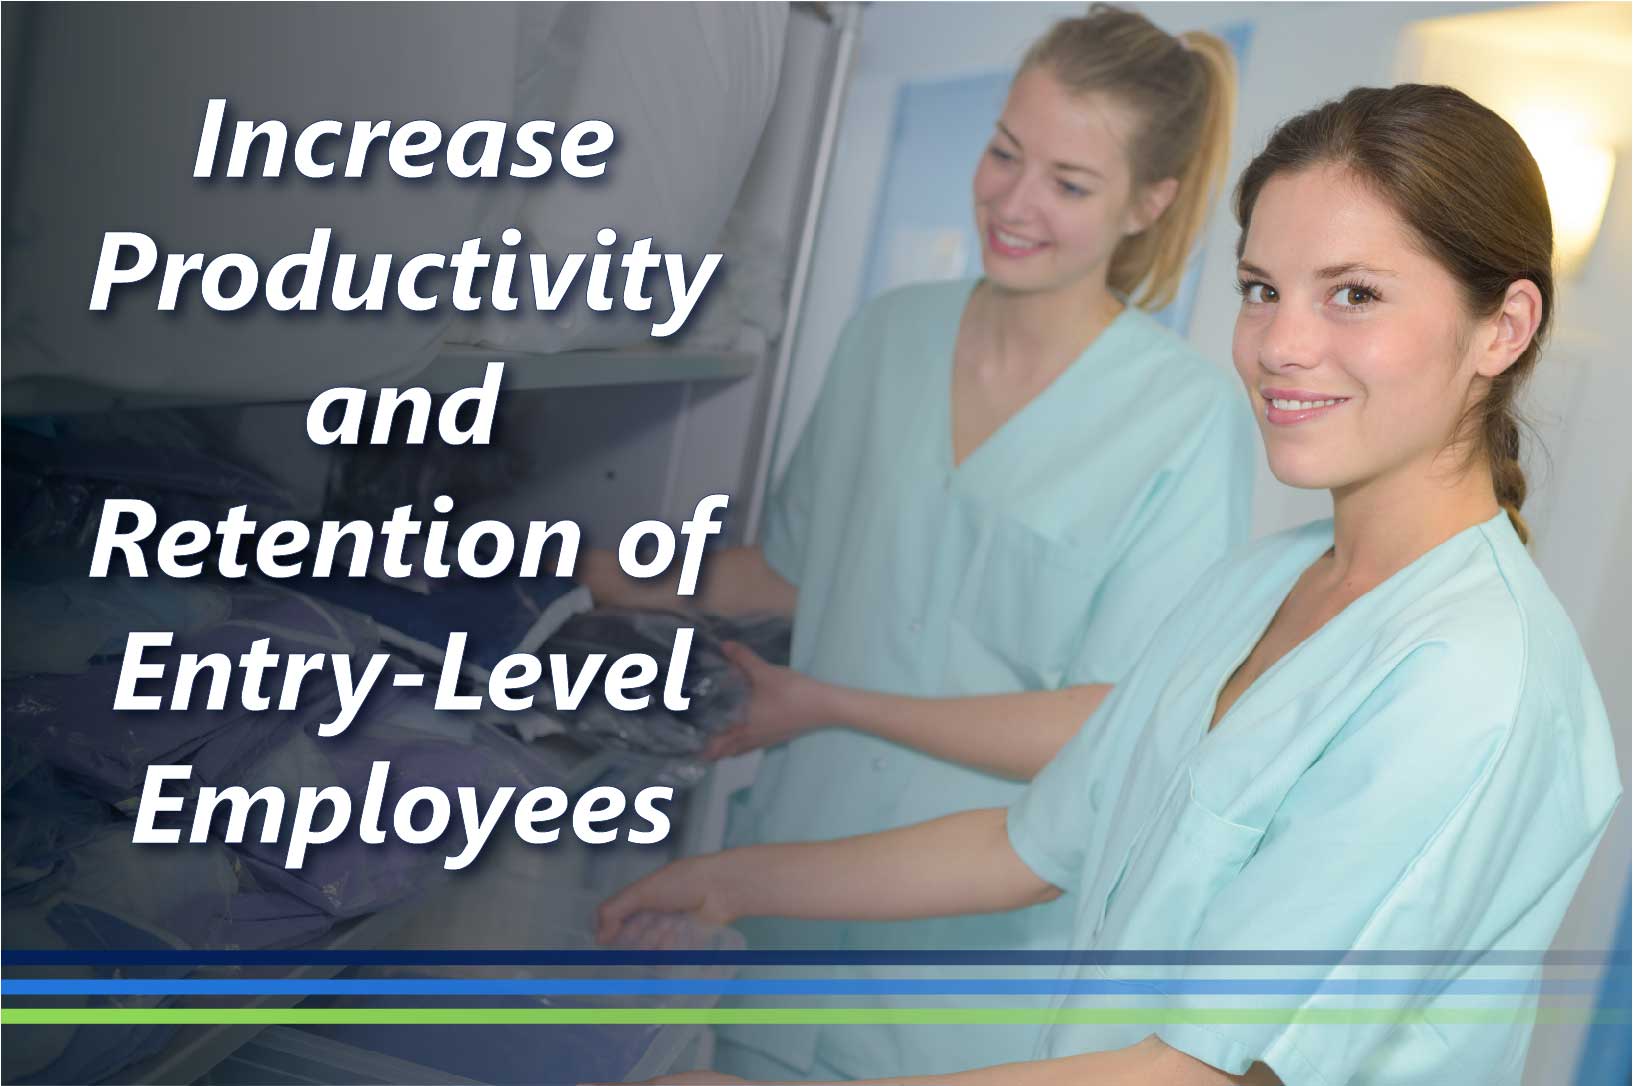 Increase Productivity and Retention of Entry-Level Employees